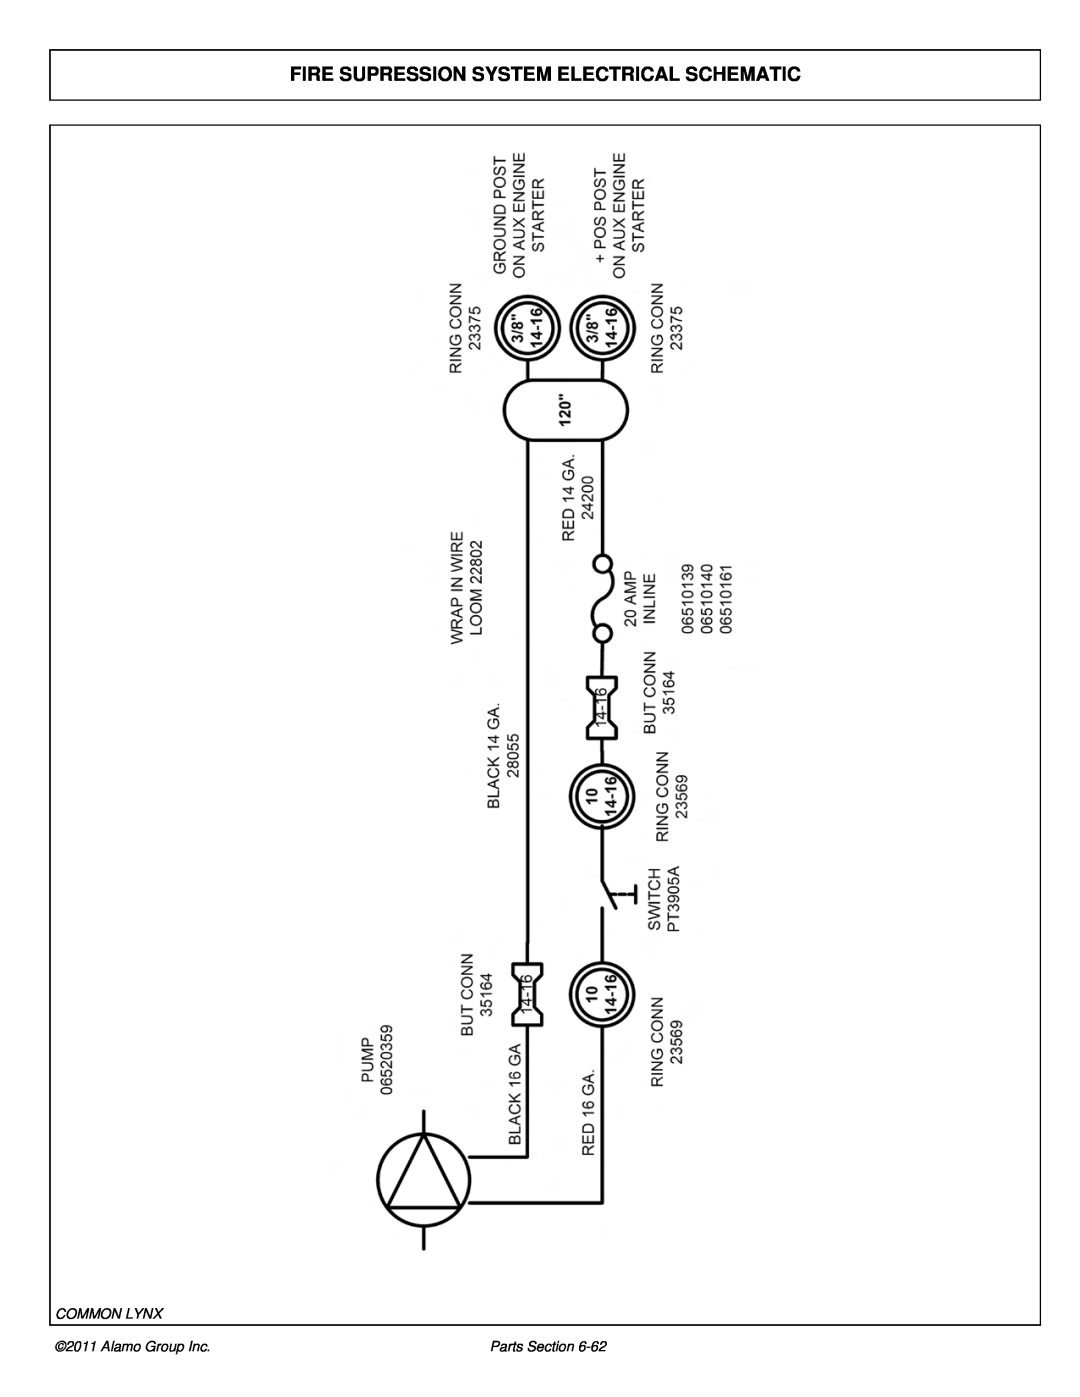 Tiger Products Co., Ltd 5101E Fire Supression System Electrical Schematic, Common Lynx, Alamo Group Inc, Parts Section 